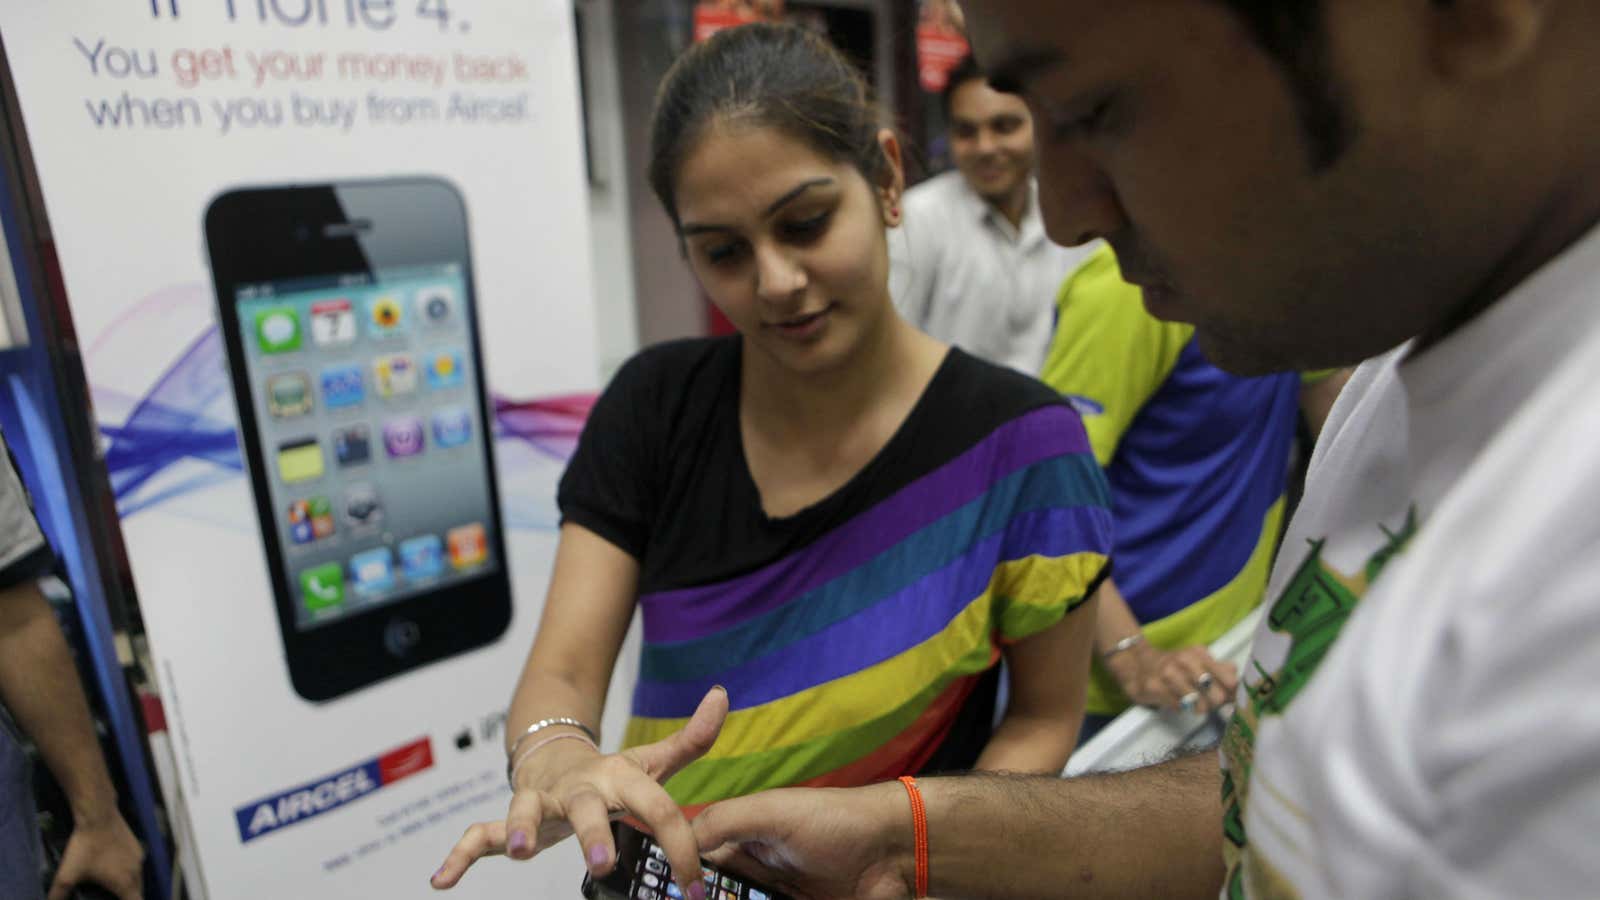 The iPhone 4 could make a comeback in India.